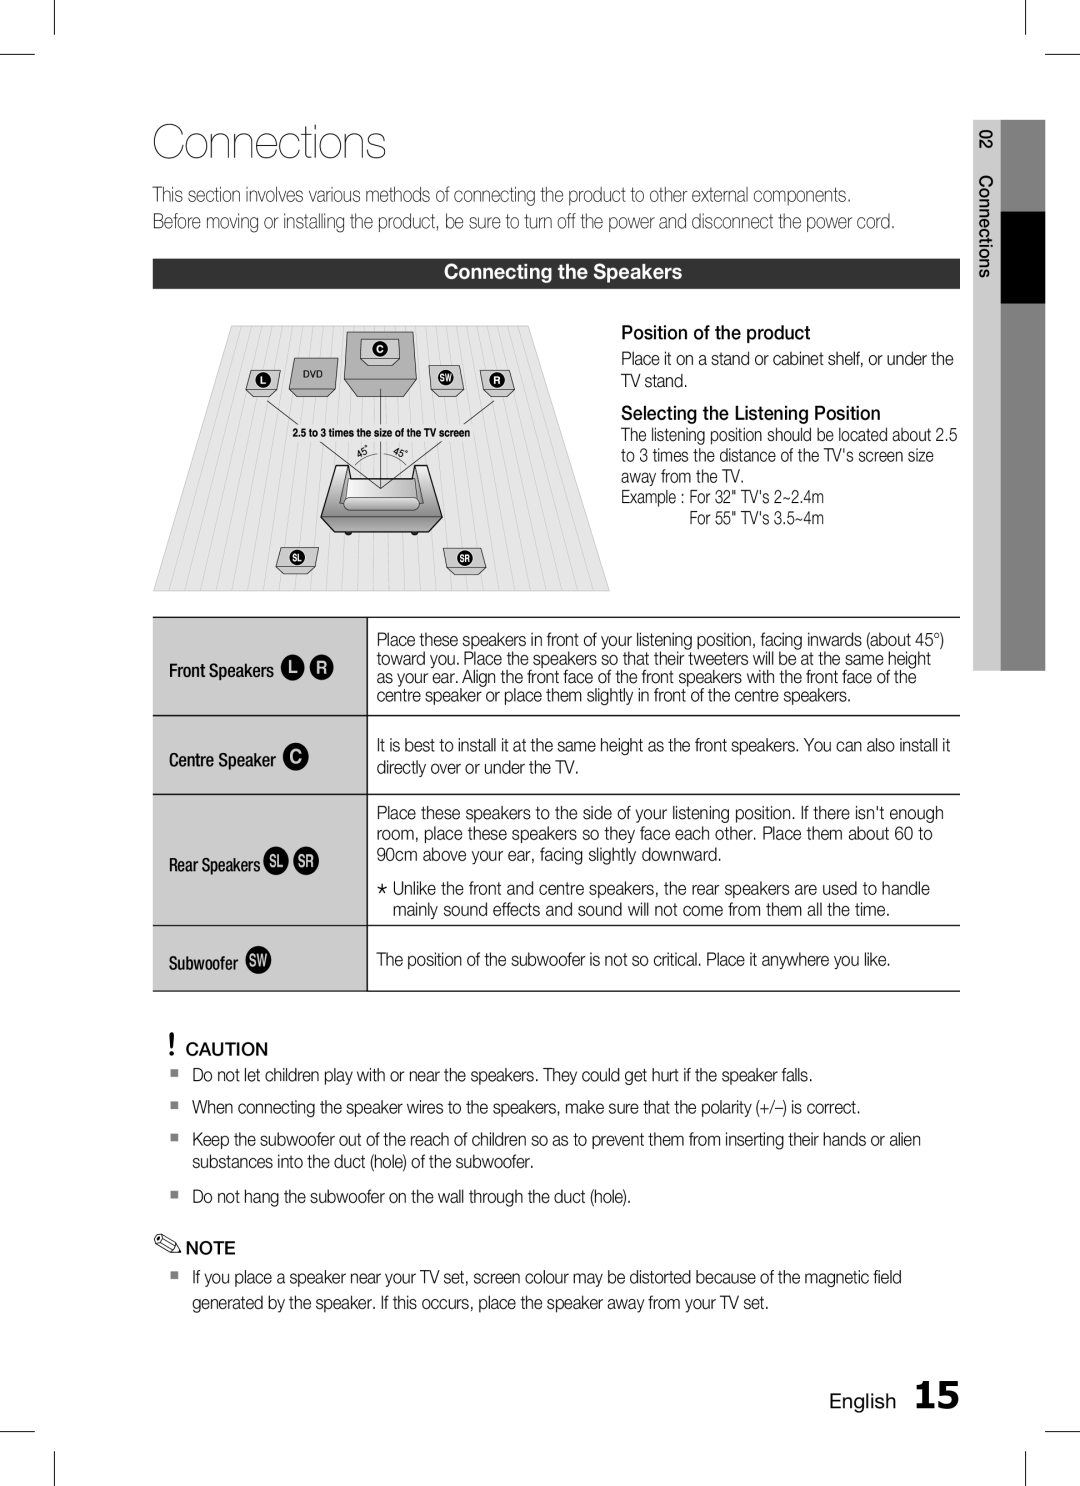 Samsung HT-C350, AH68-02293B user manual Connections, Connecting the Speakers 